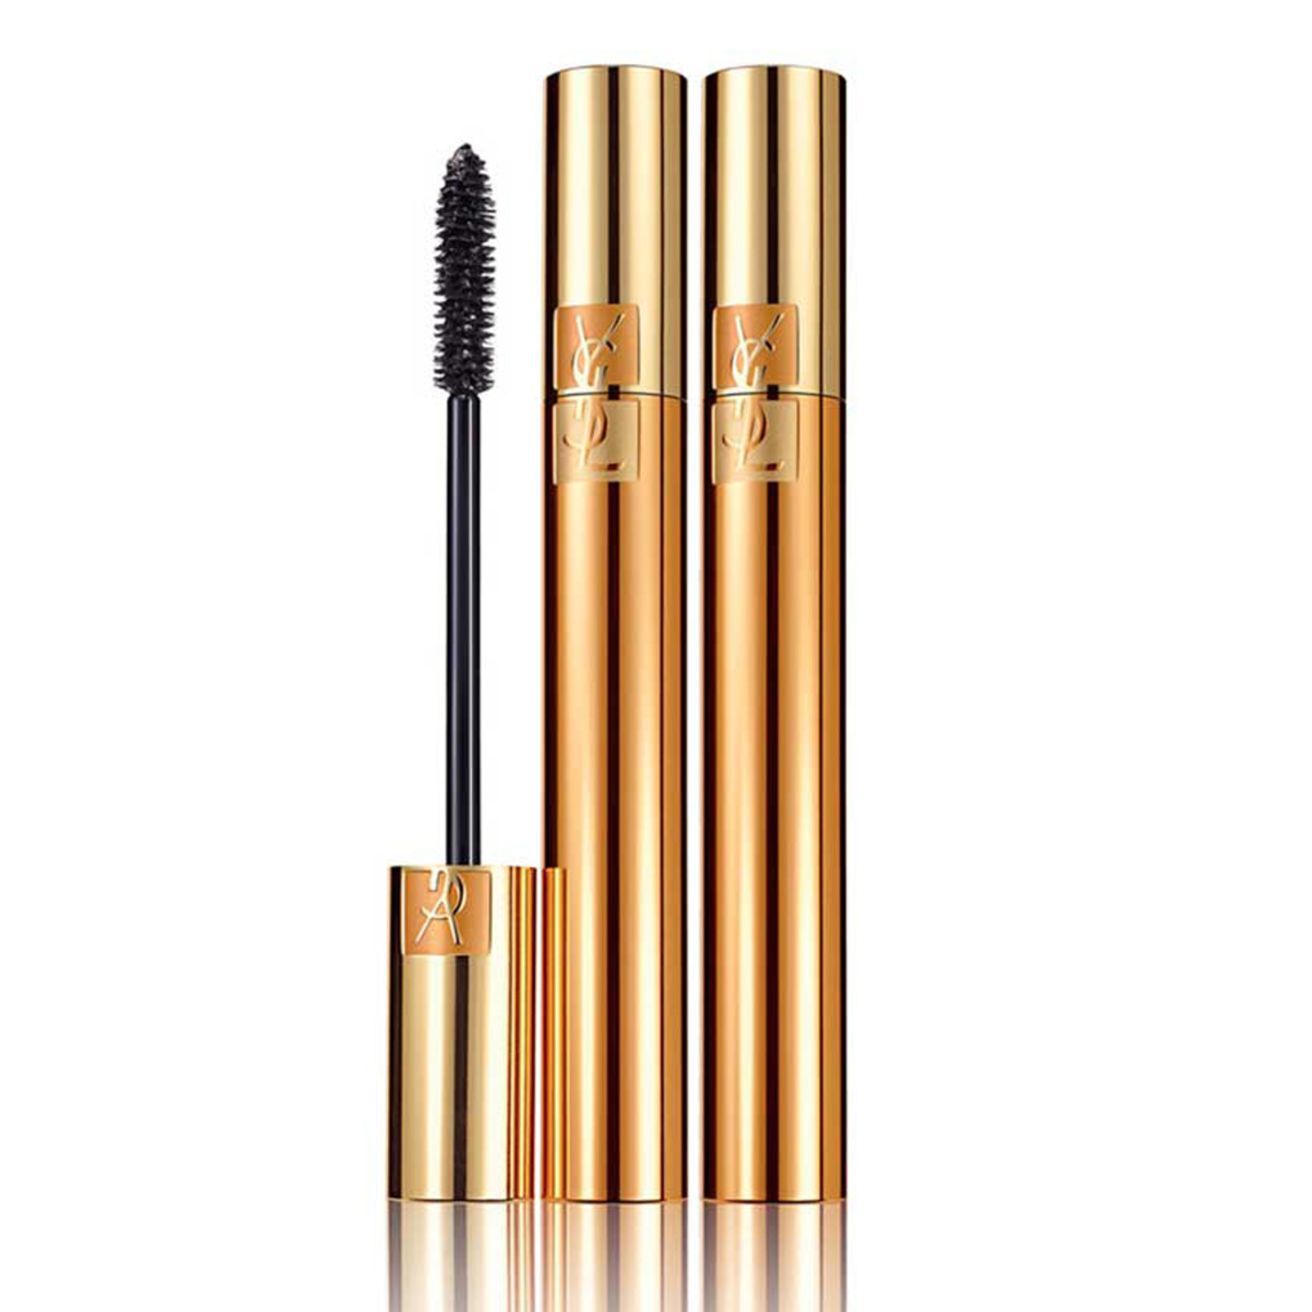 YSL Mascara Volume Effet Faux Cils Duo (Travel Selection)